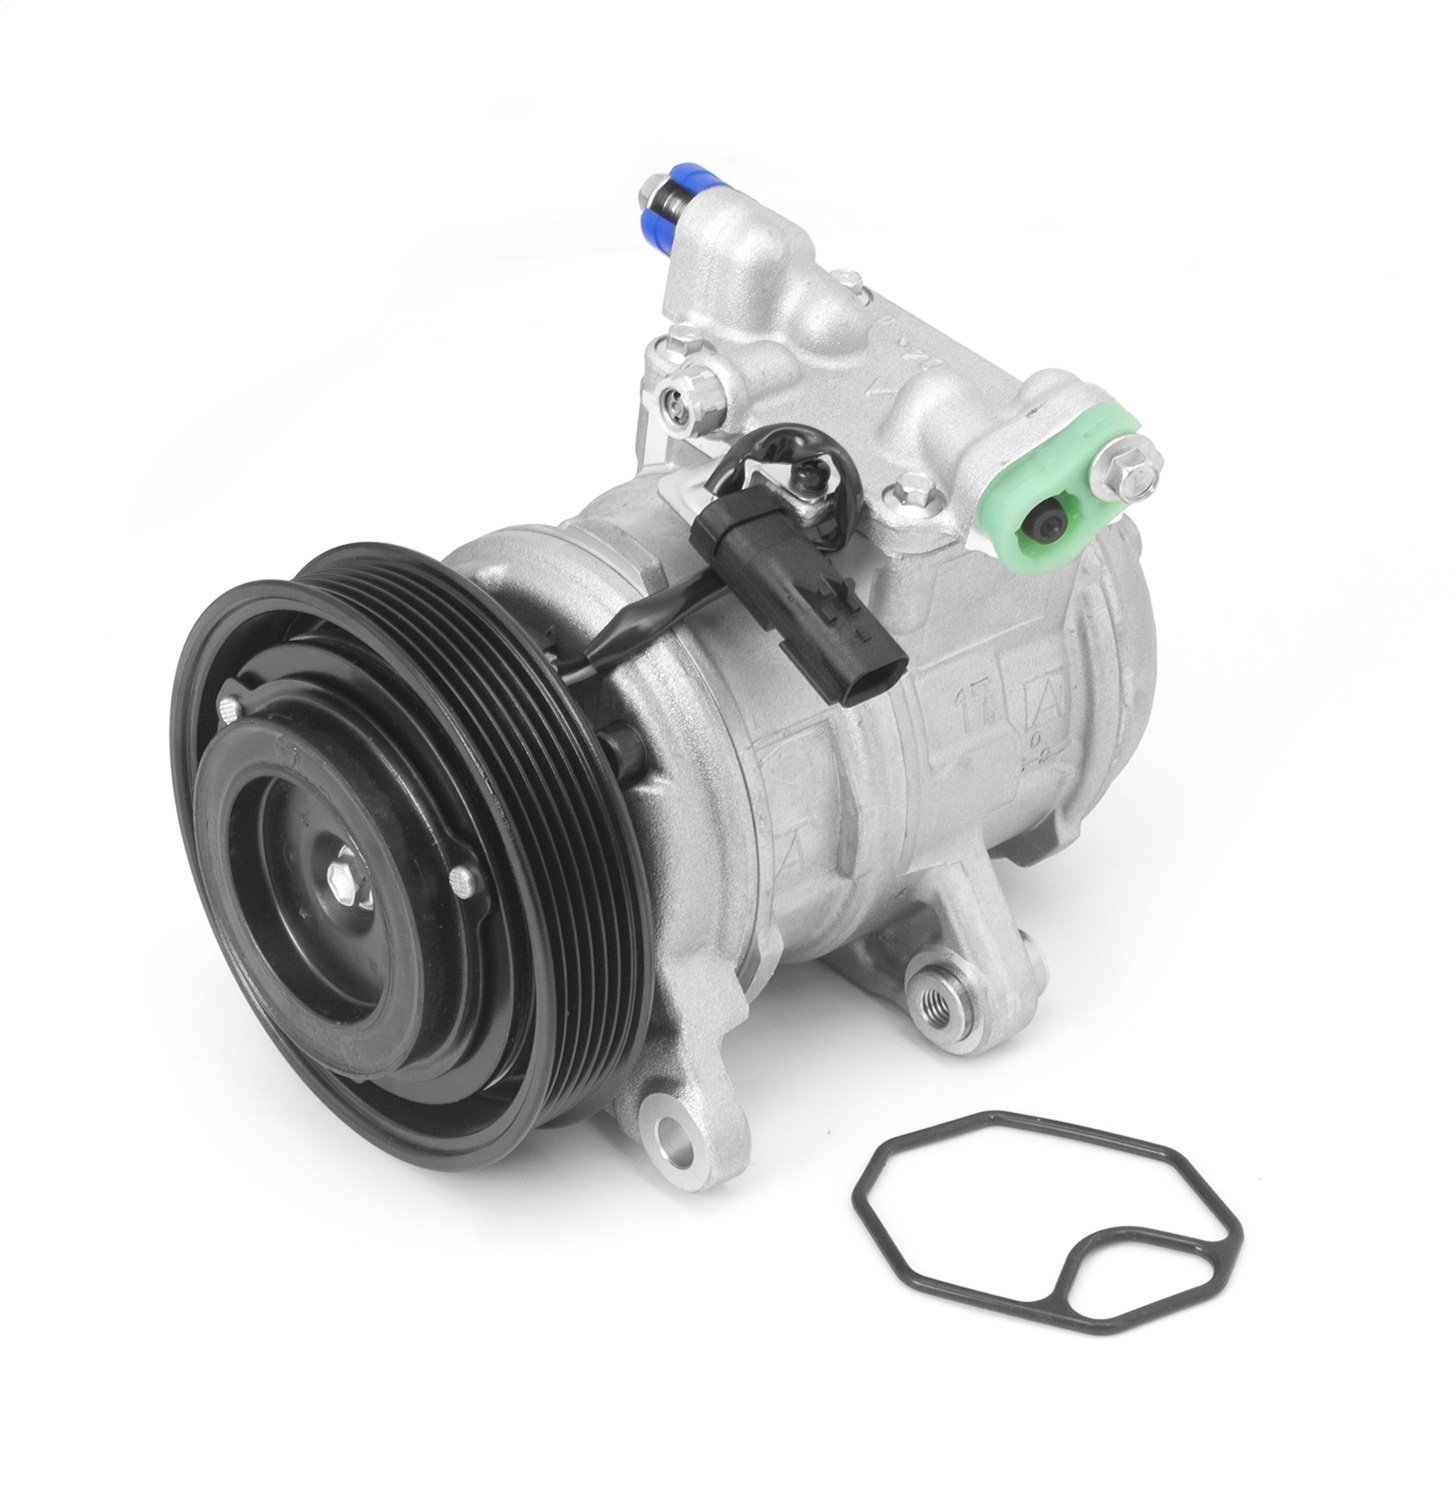 This air conditioning compressor from Omix-ADA fits 97-02 Wrangler and 97-00 Cherokees 2.5L 97-99 Wr